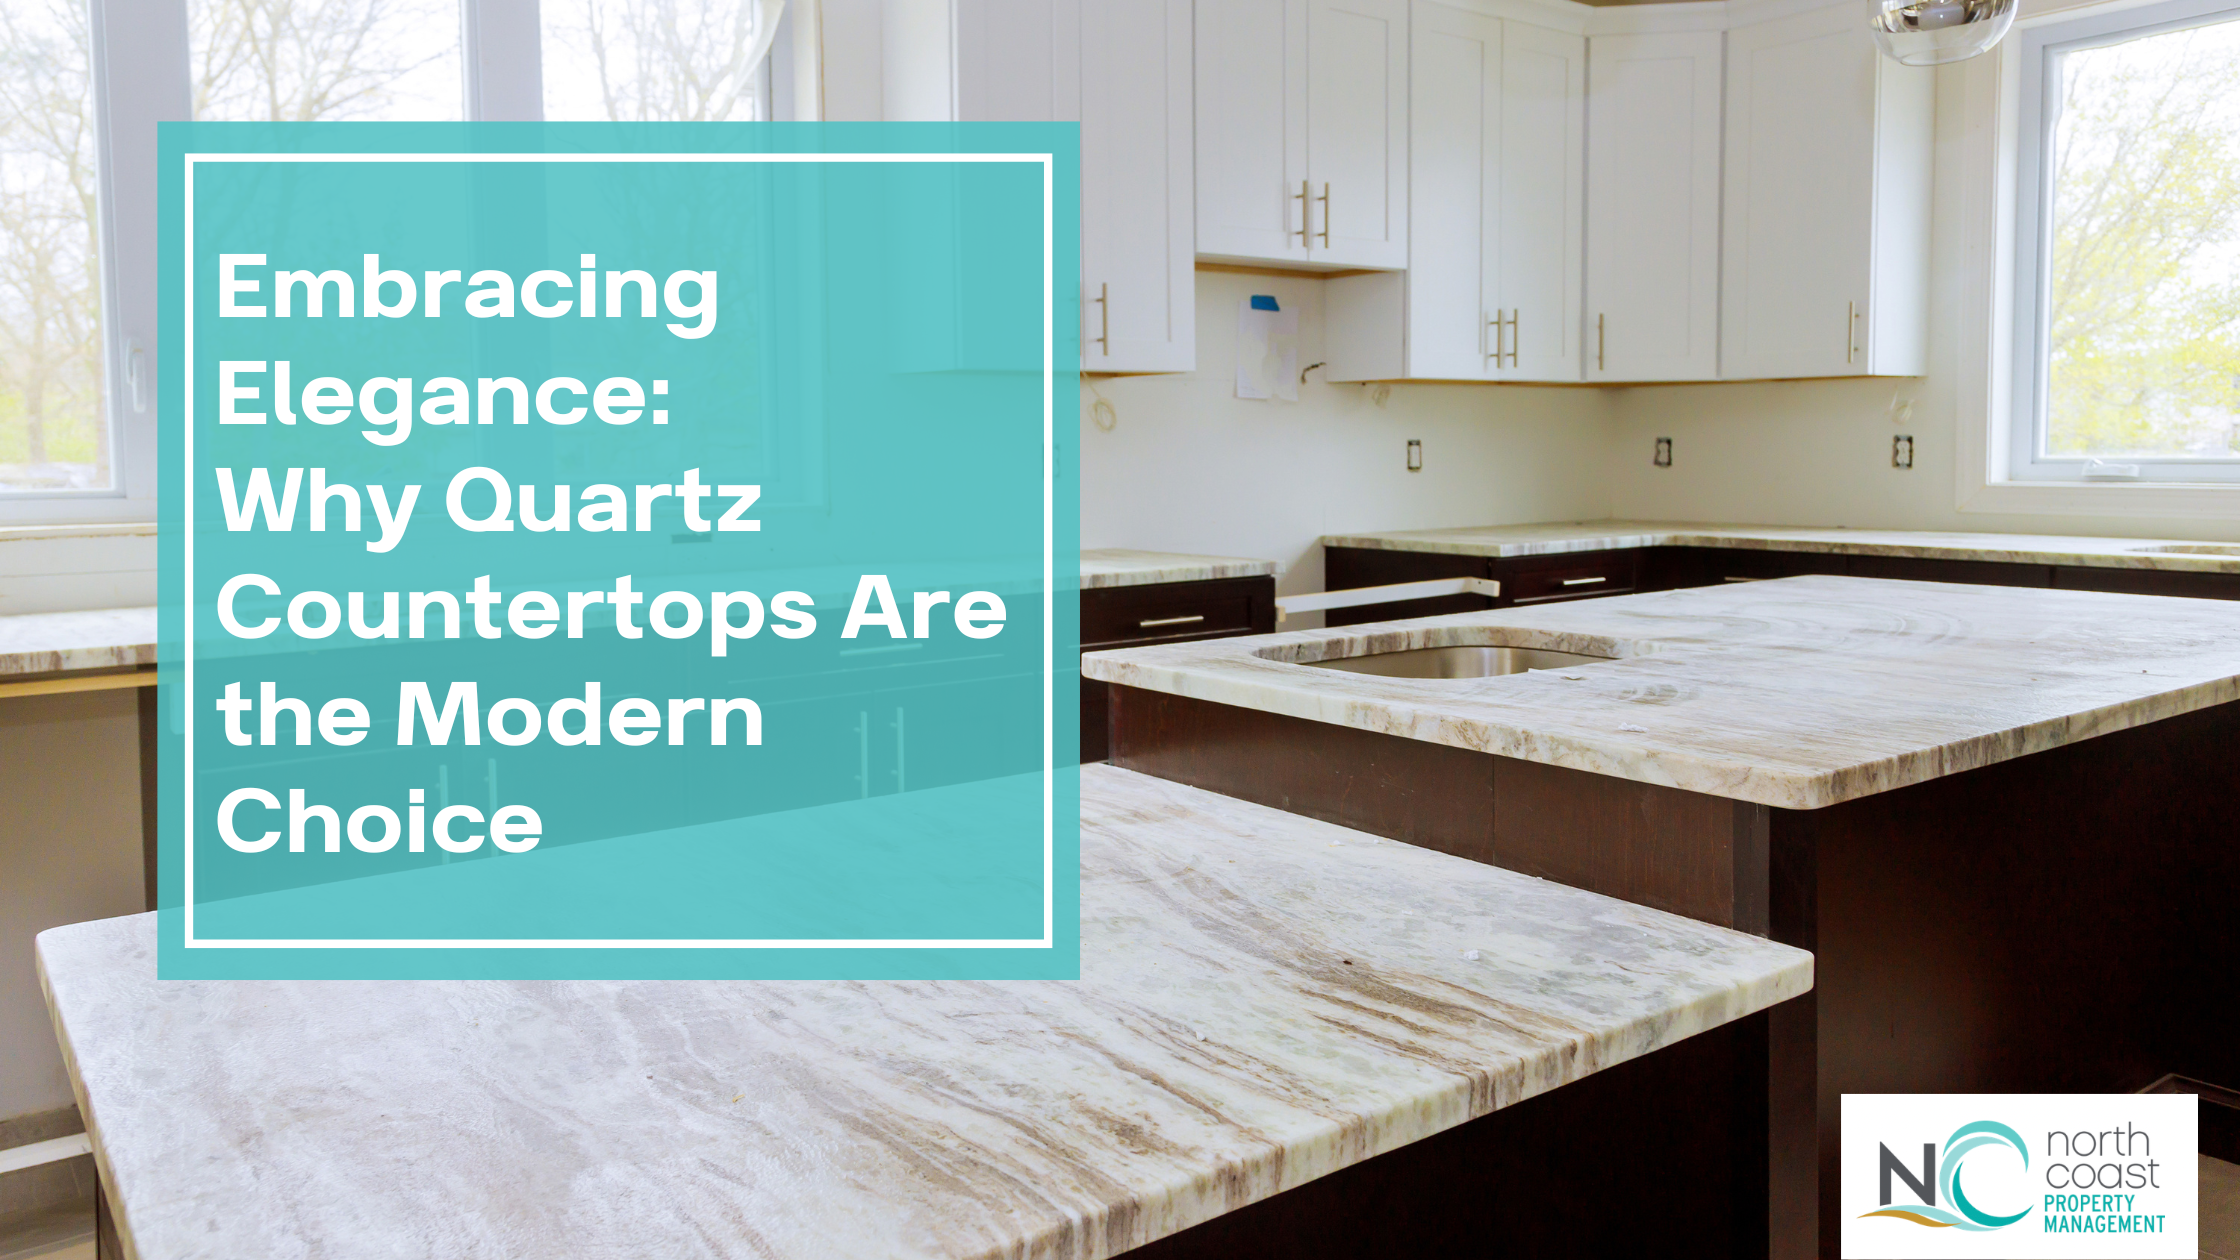 Embracing Elegance: Why Quartz Countertops Are the Modern Choice